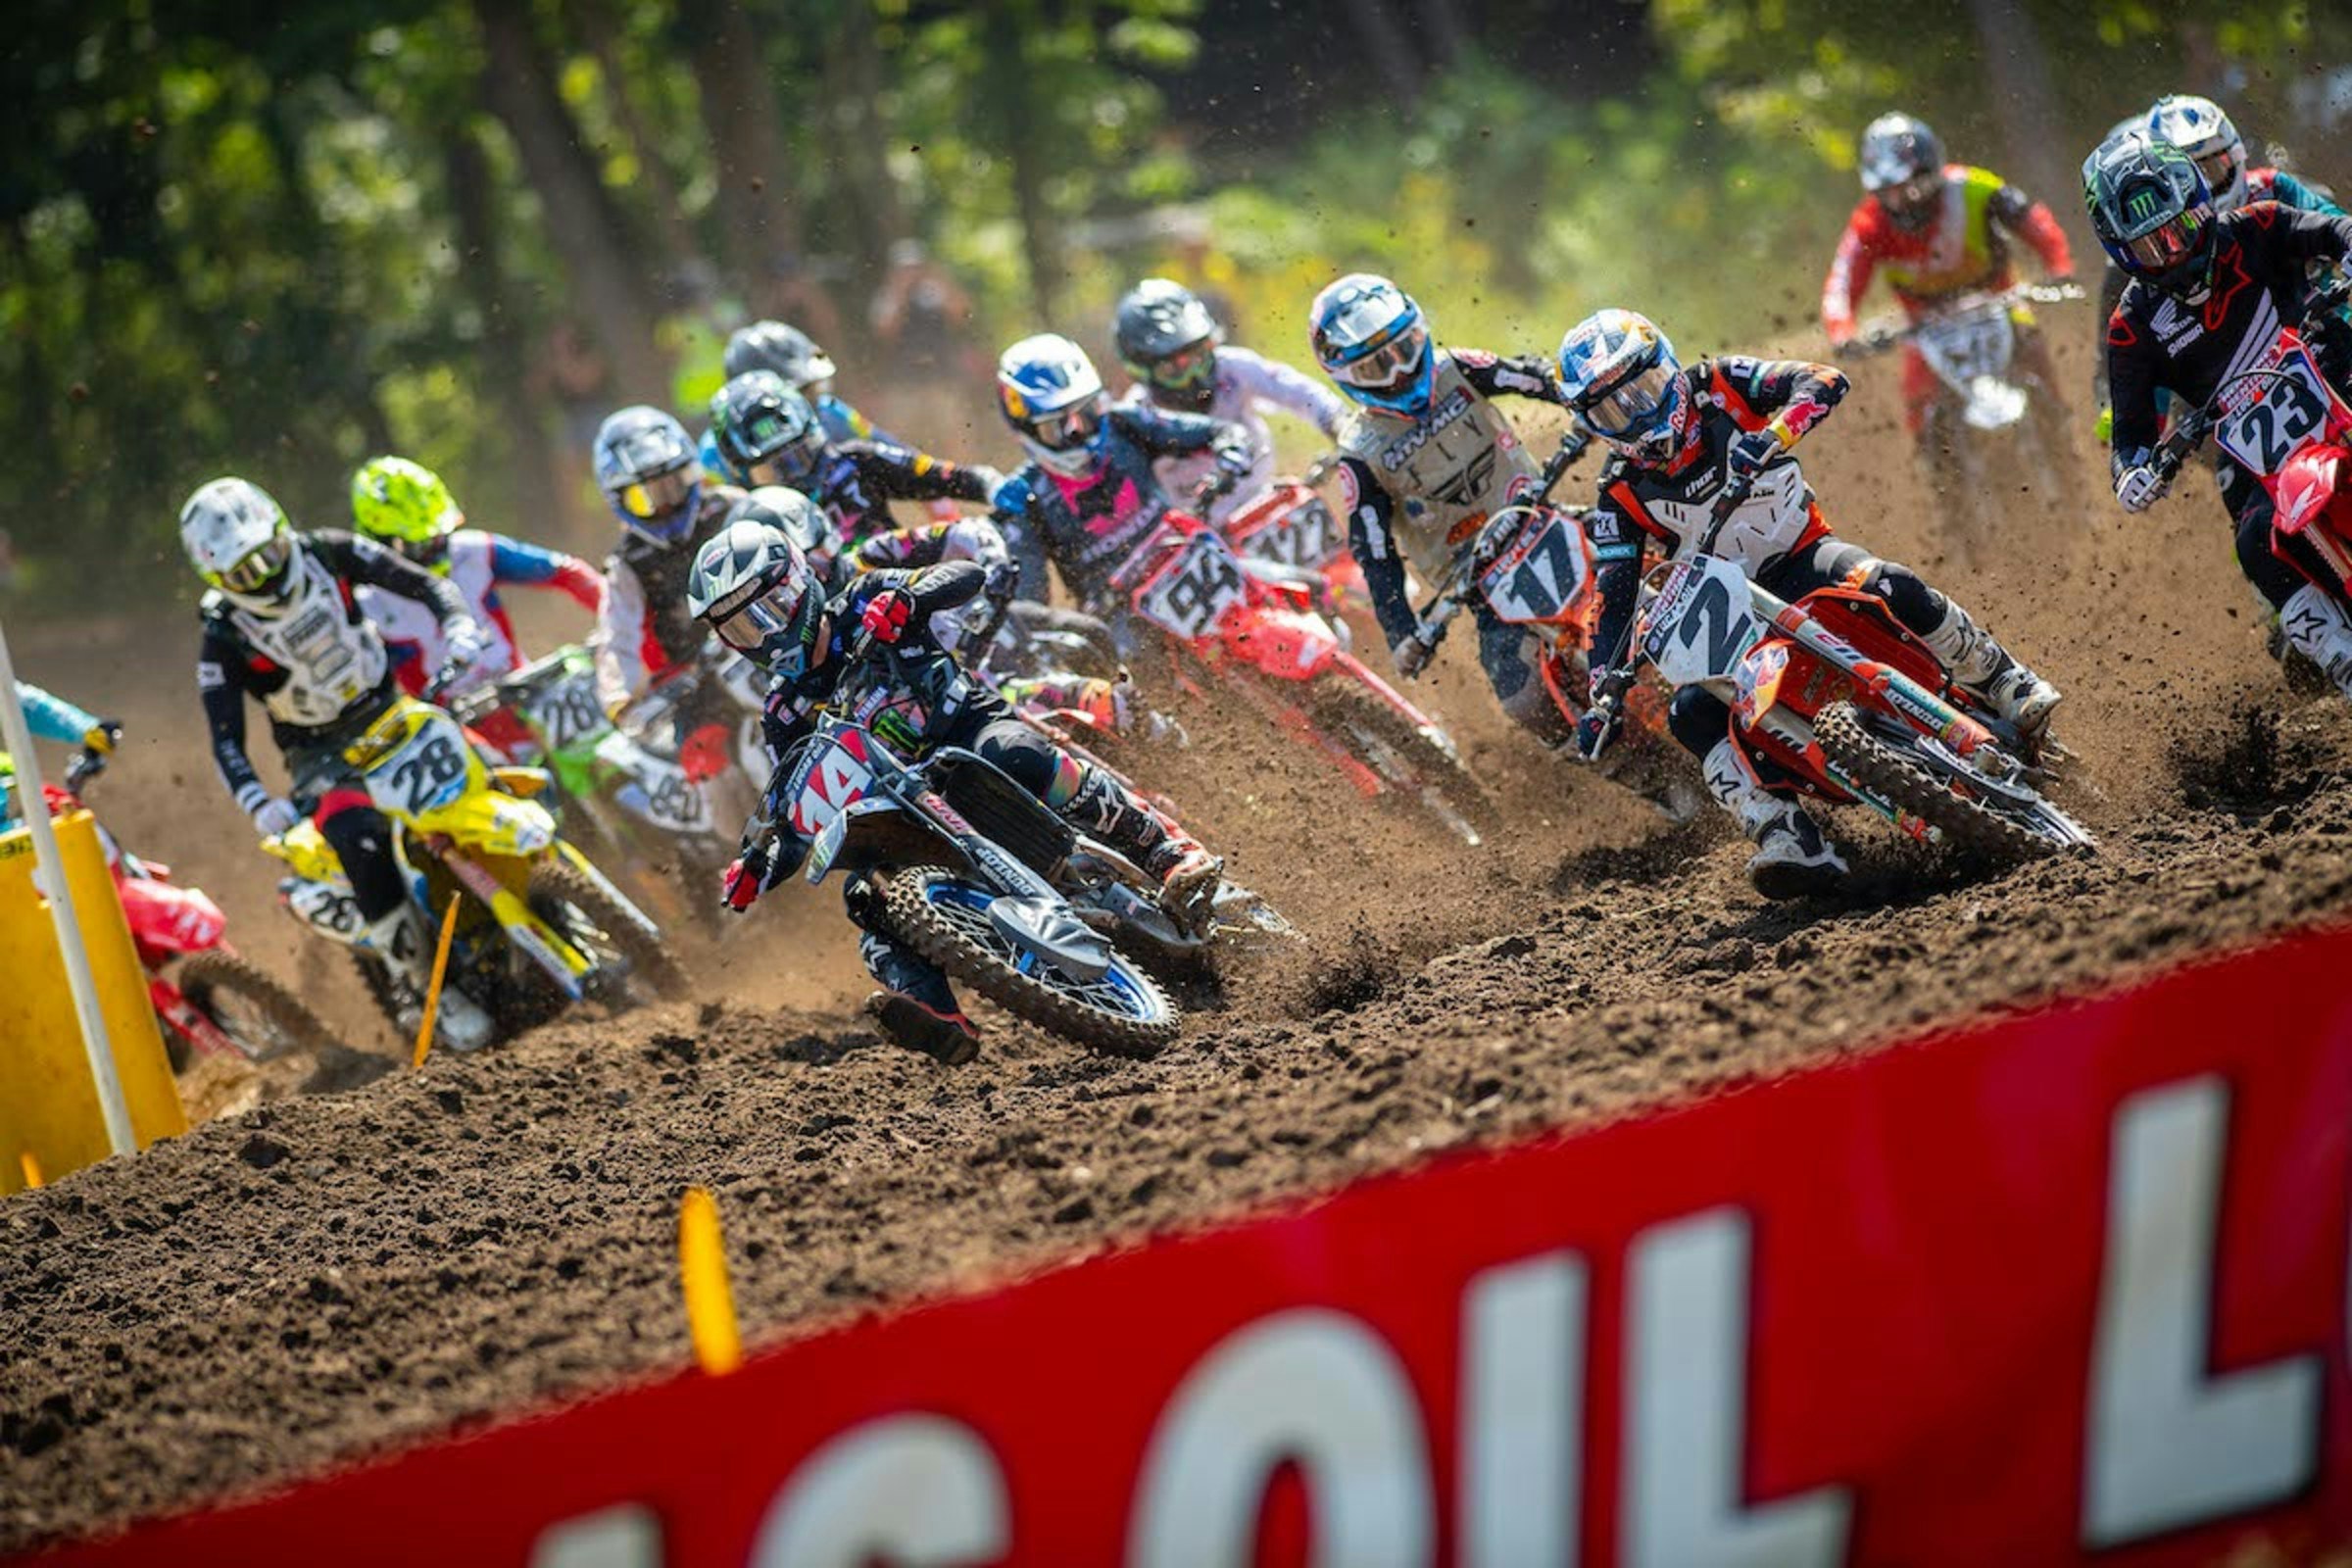 2022 Lucas Oil Pro Motocross Broadcast Package Announced, Expanded Partnership with MAVTV